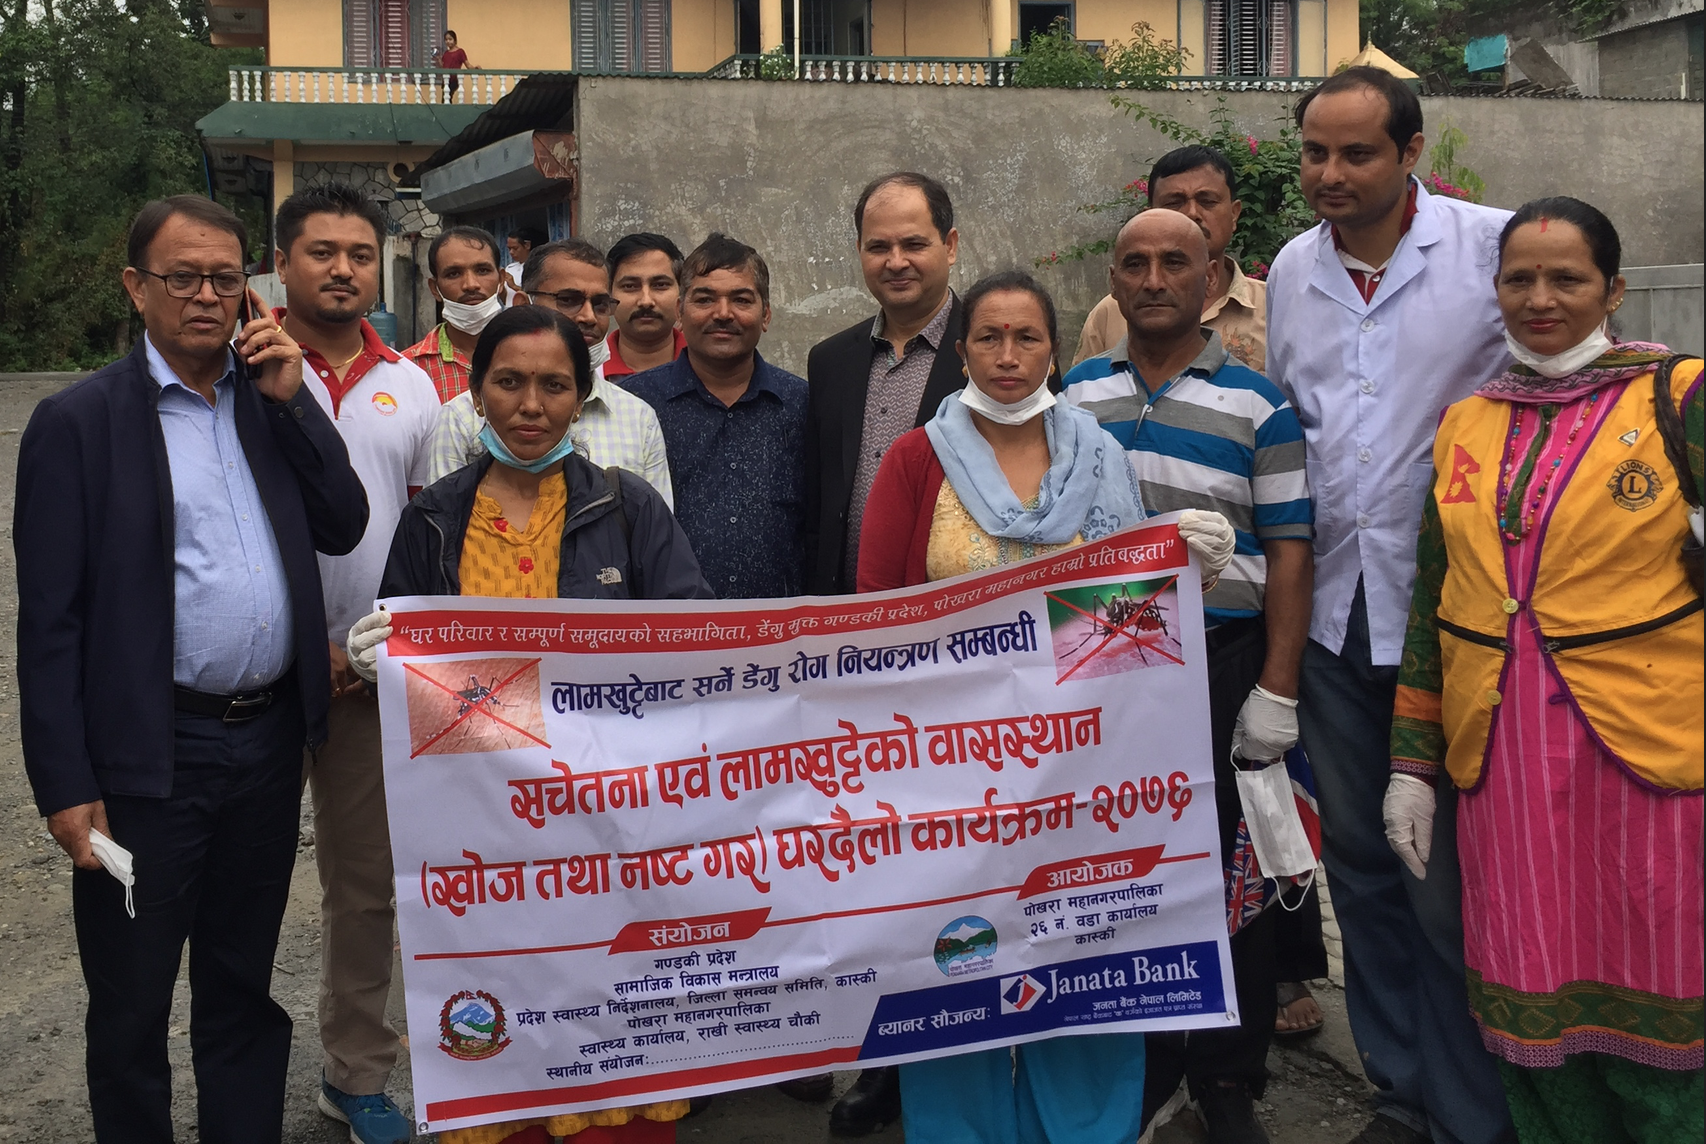 The Mayor of the Pokhara Metropolitan City joins the Dengue awareness and search and destroy programs.